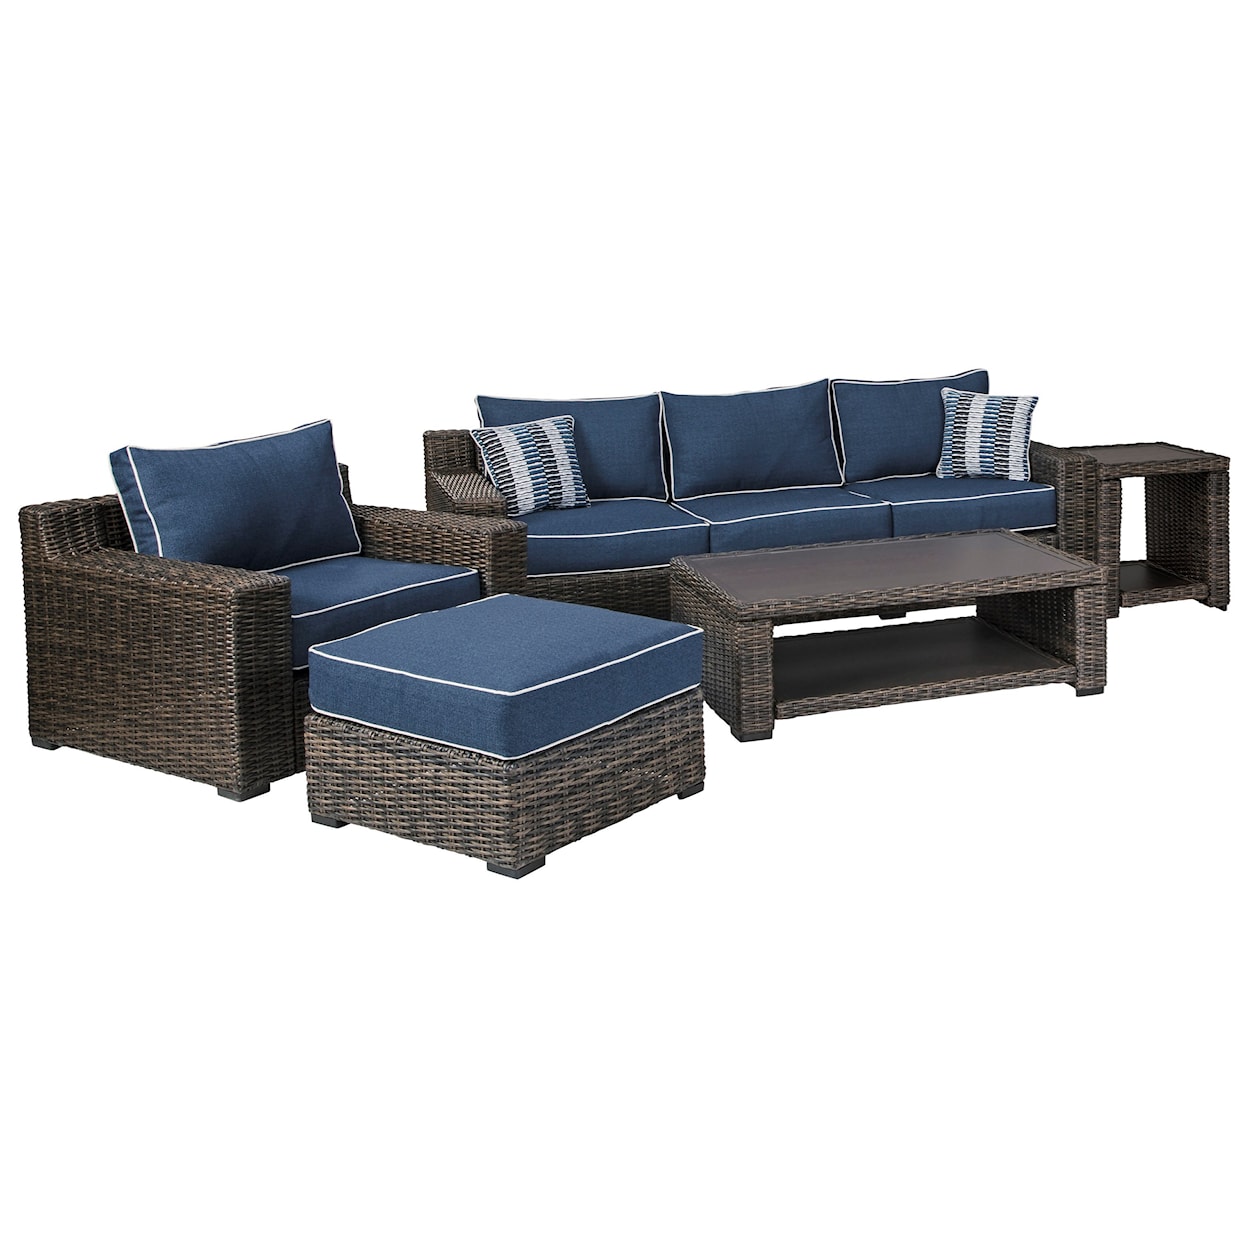 Benchcraft Grasson Lane 5 Pc. Outdoor Seating Group